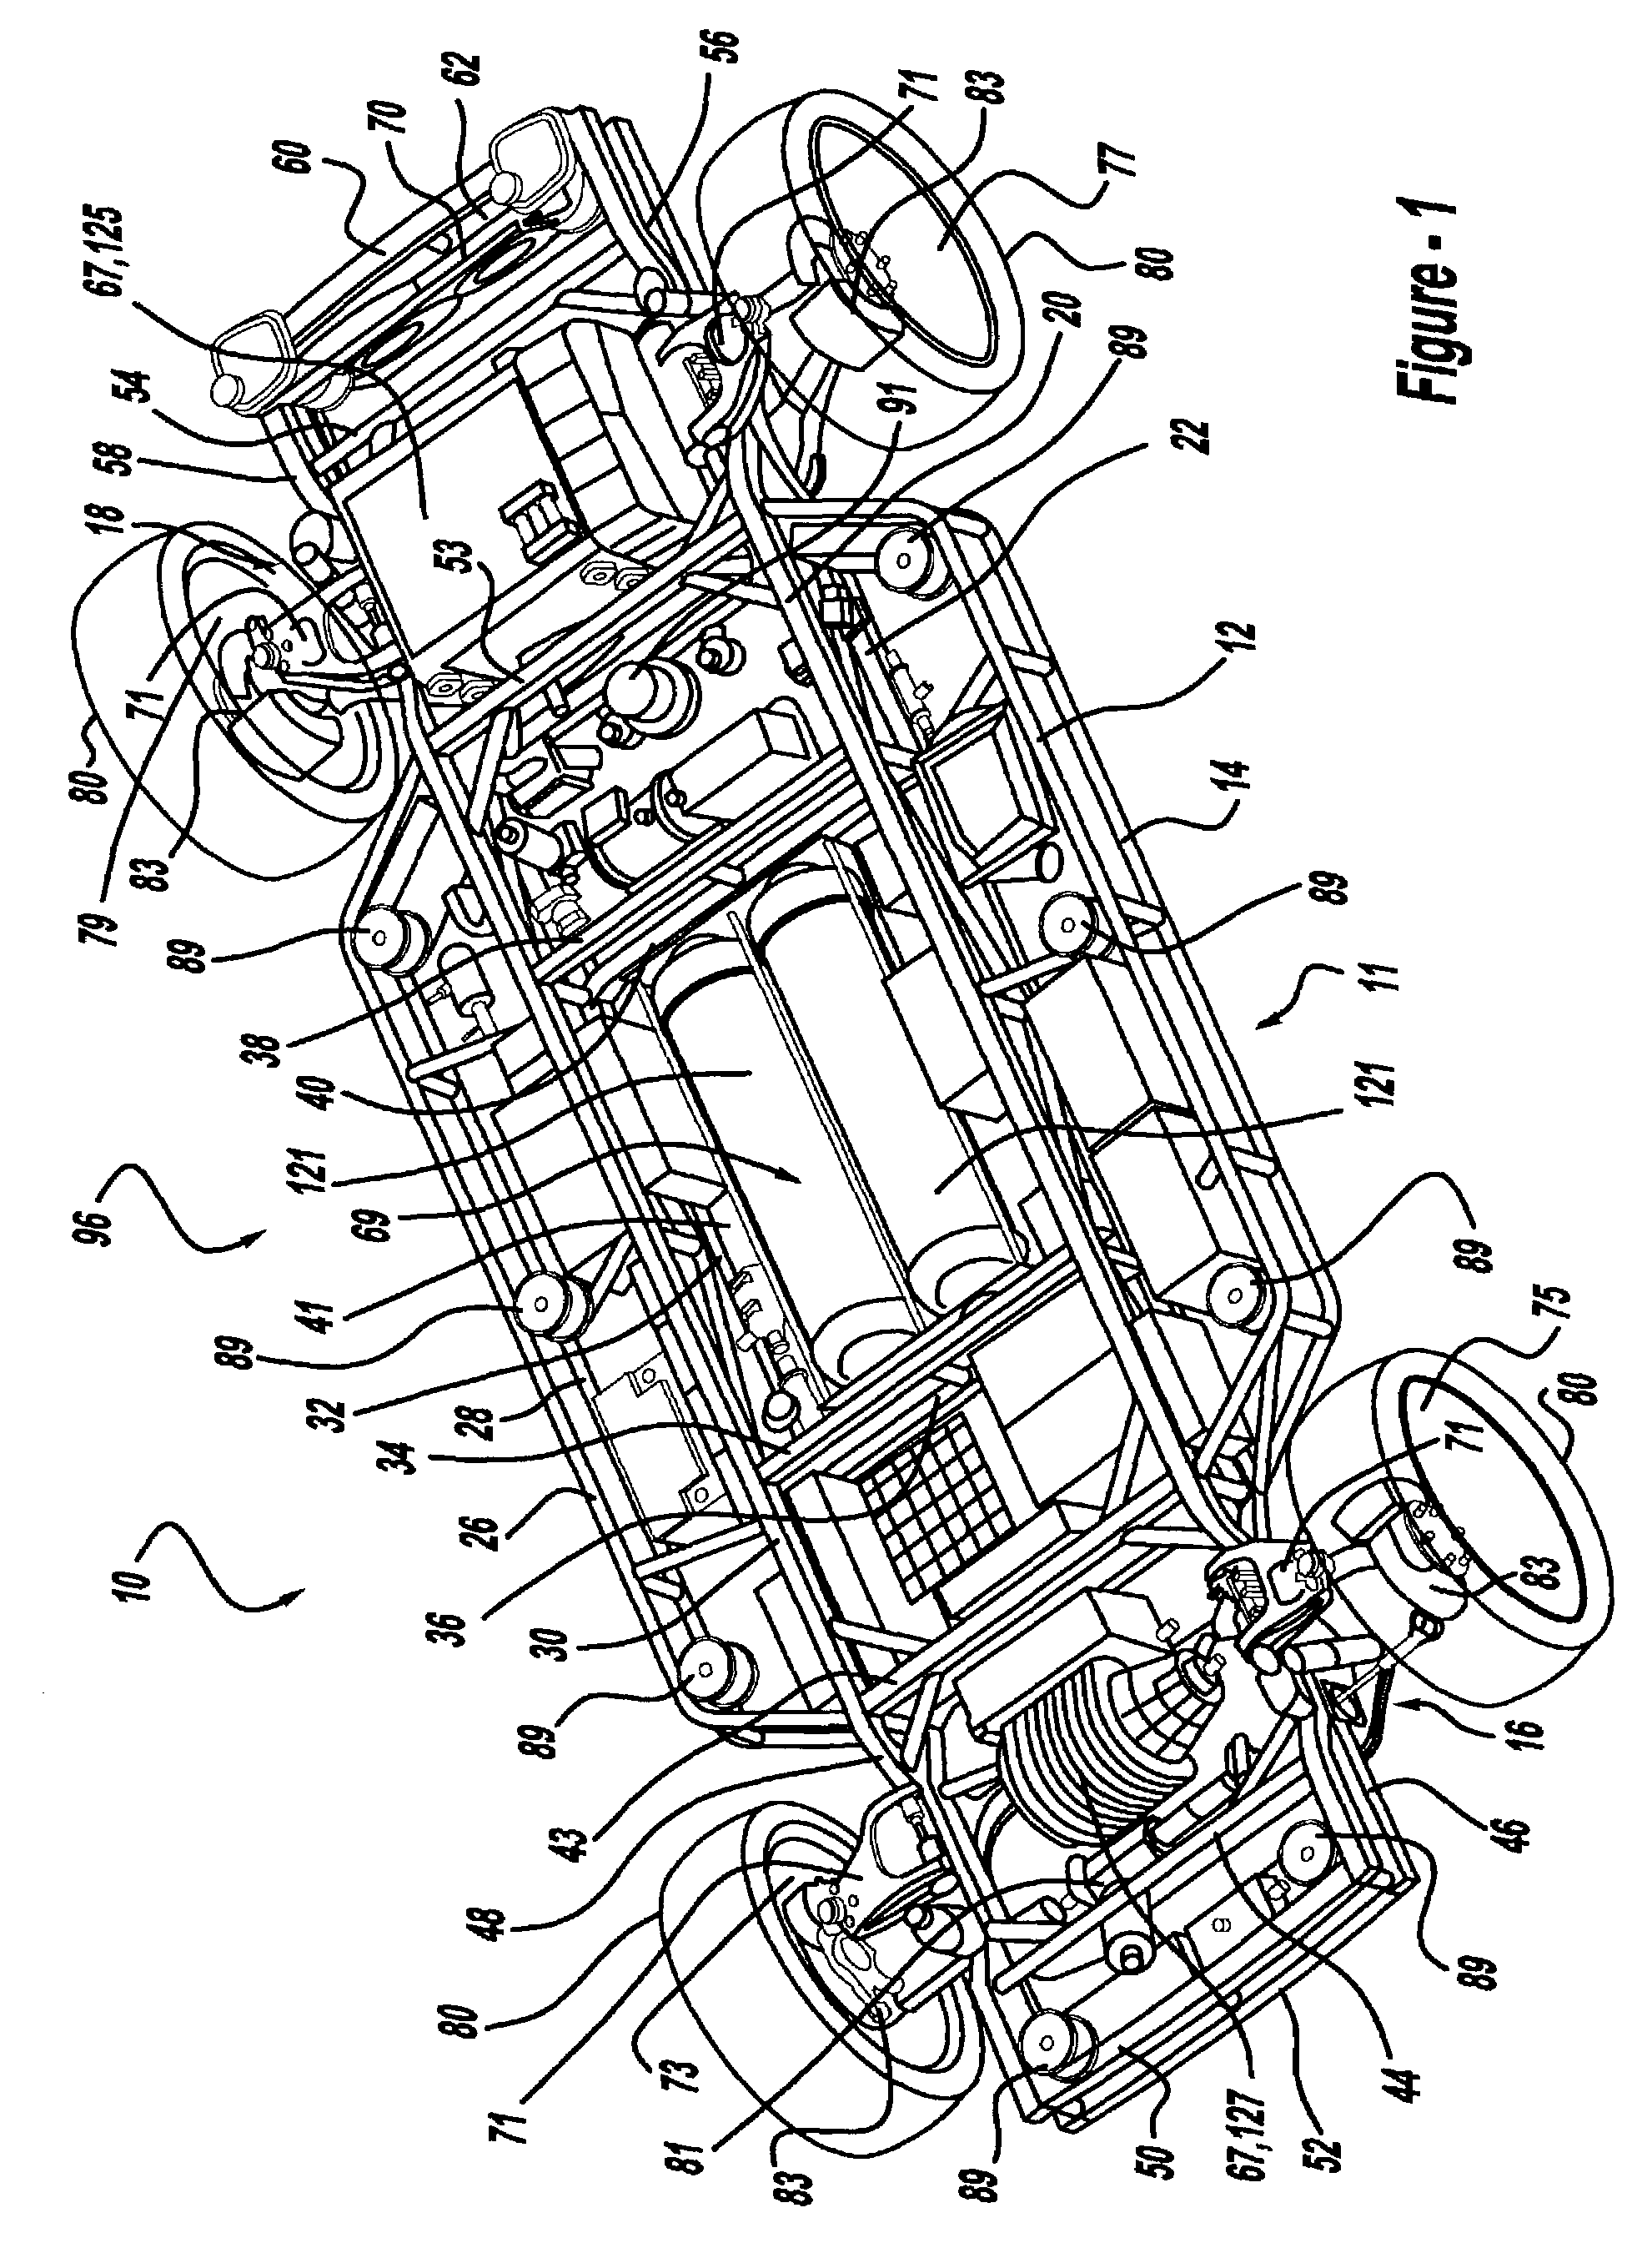 Vehicle chassis having programmable operating characteristics and method for using same